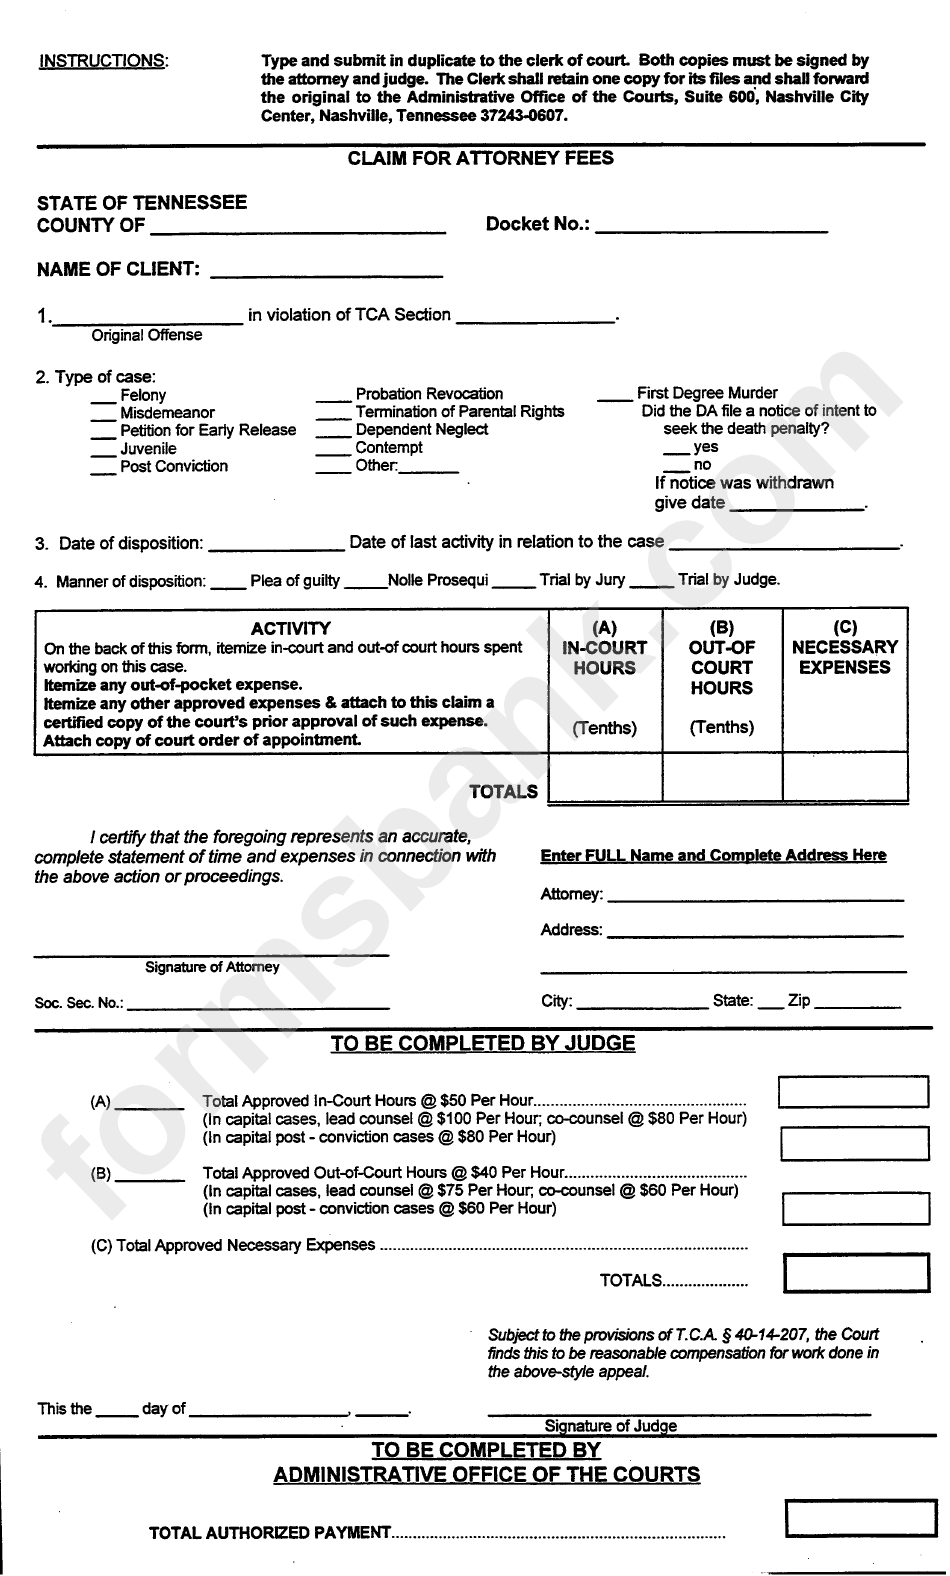 Claim For Attorney Fees Form Tennessee printable pdf download